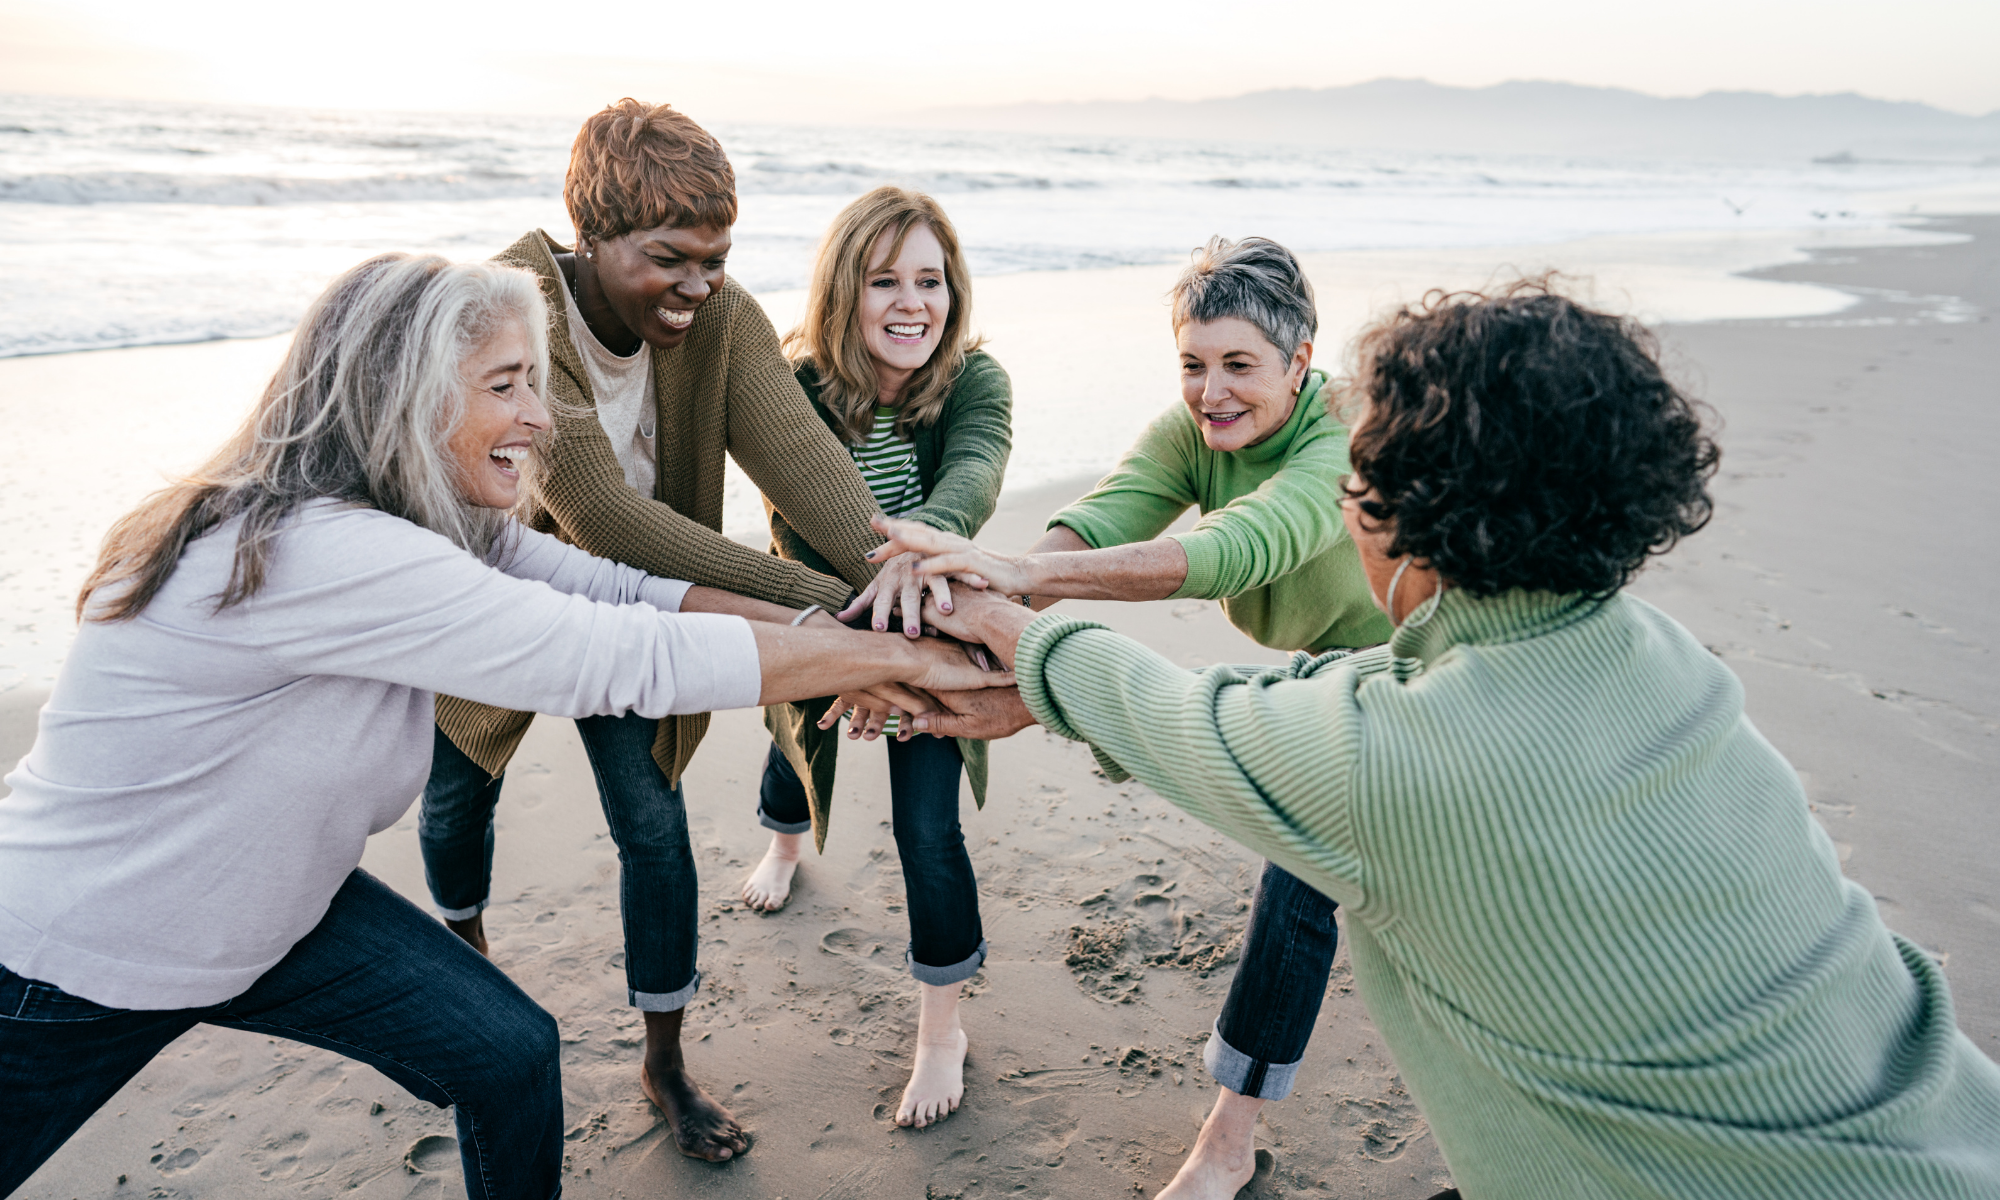 Support group enjoying the day together on the beach